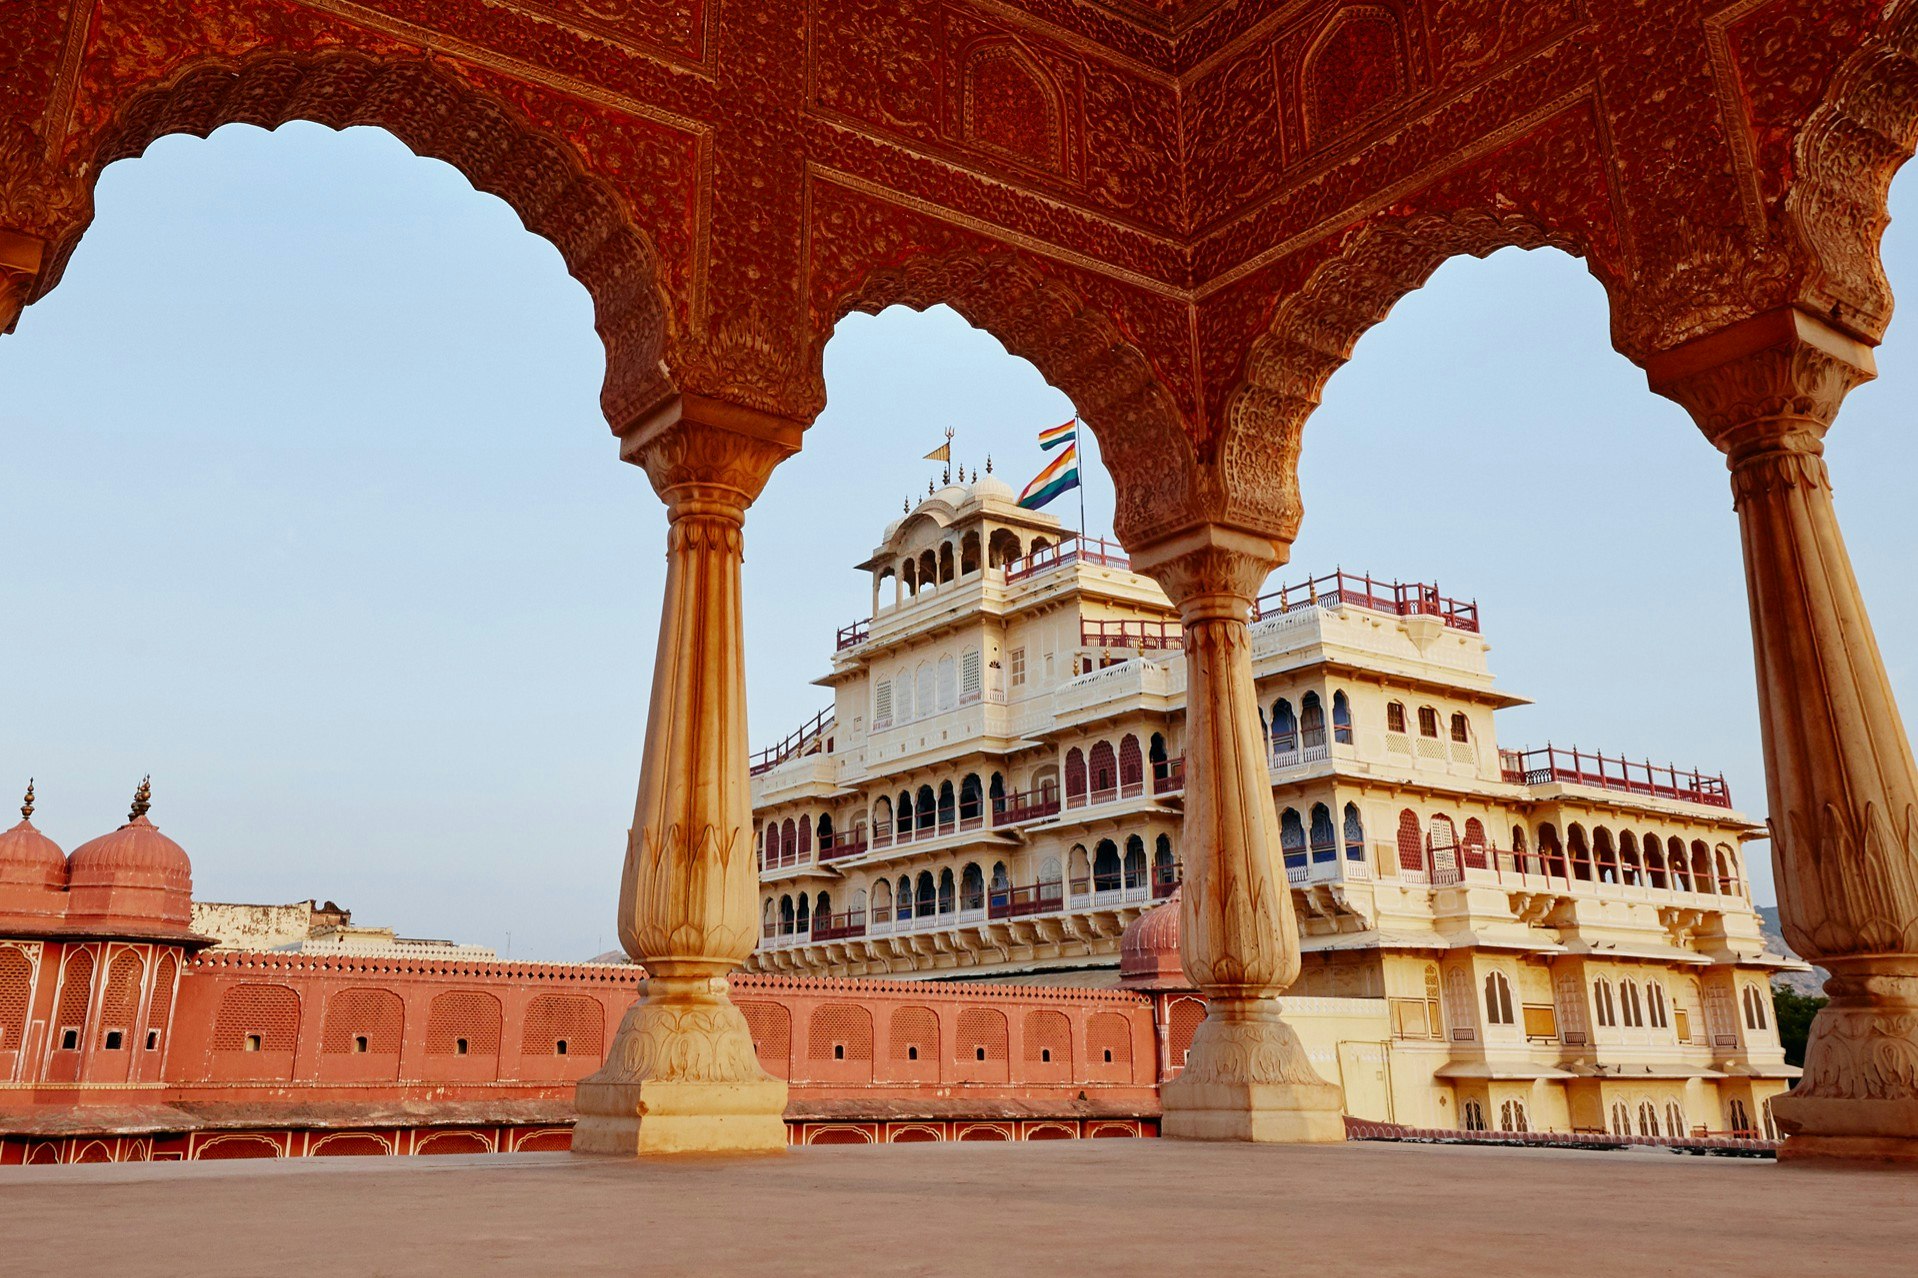 The exterior of the City Palace of Jaipur